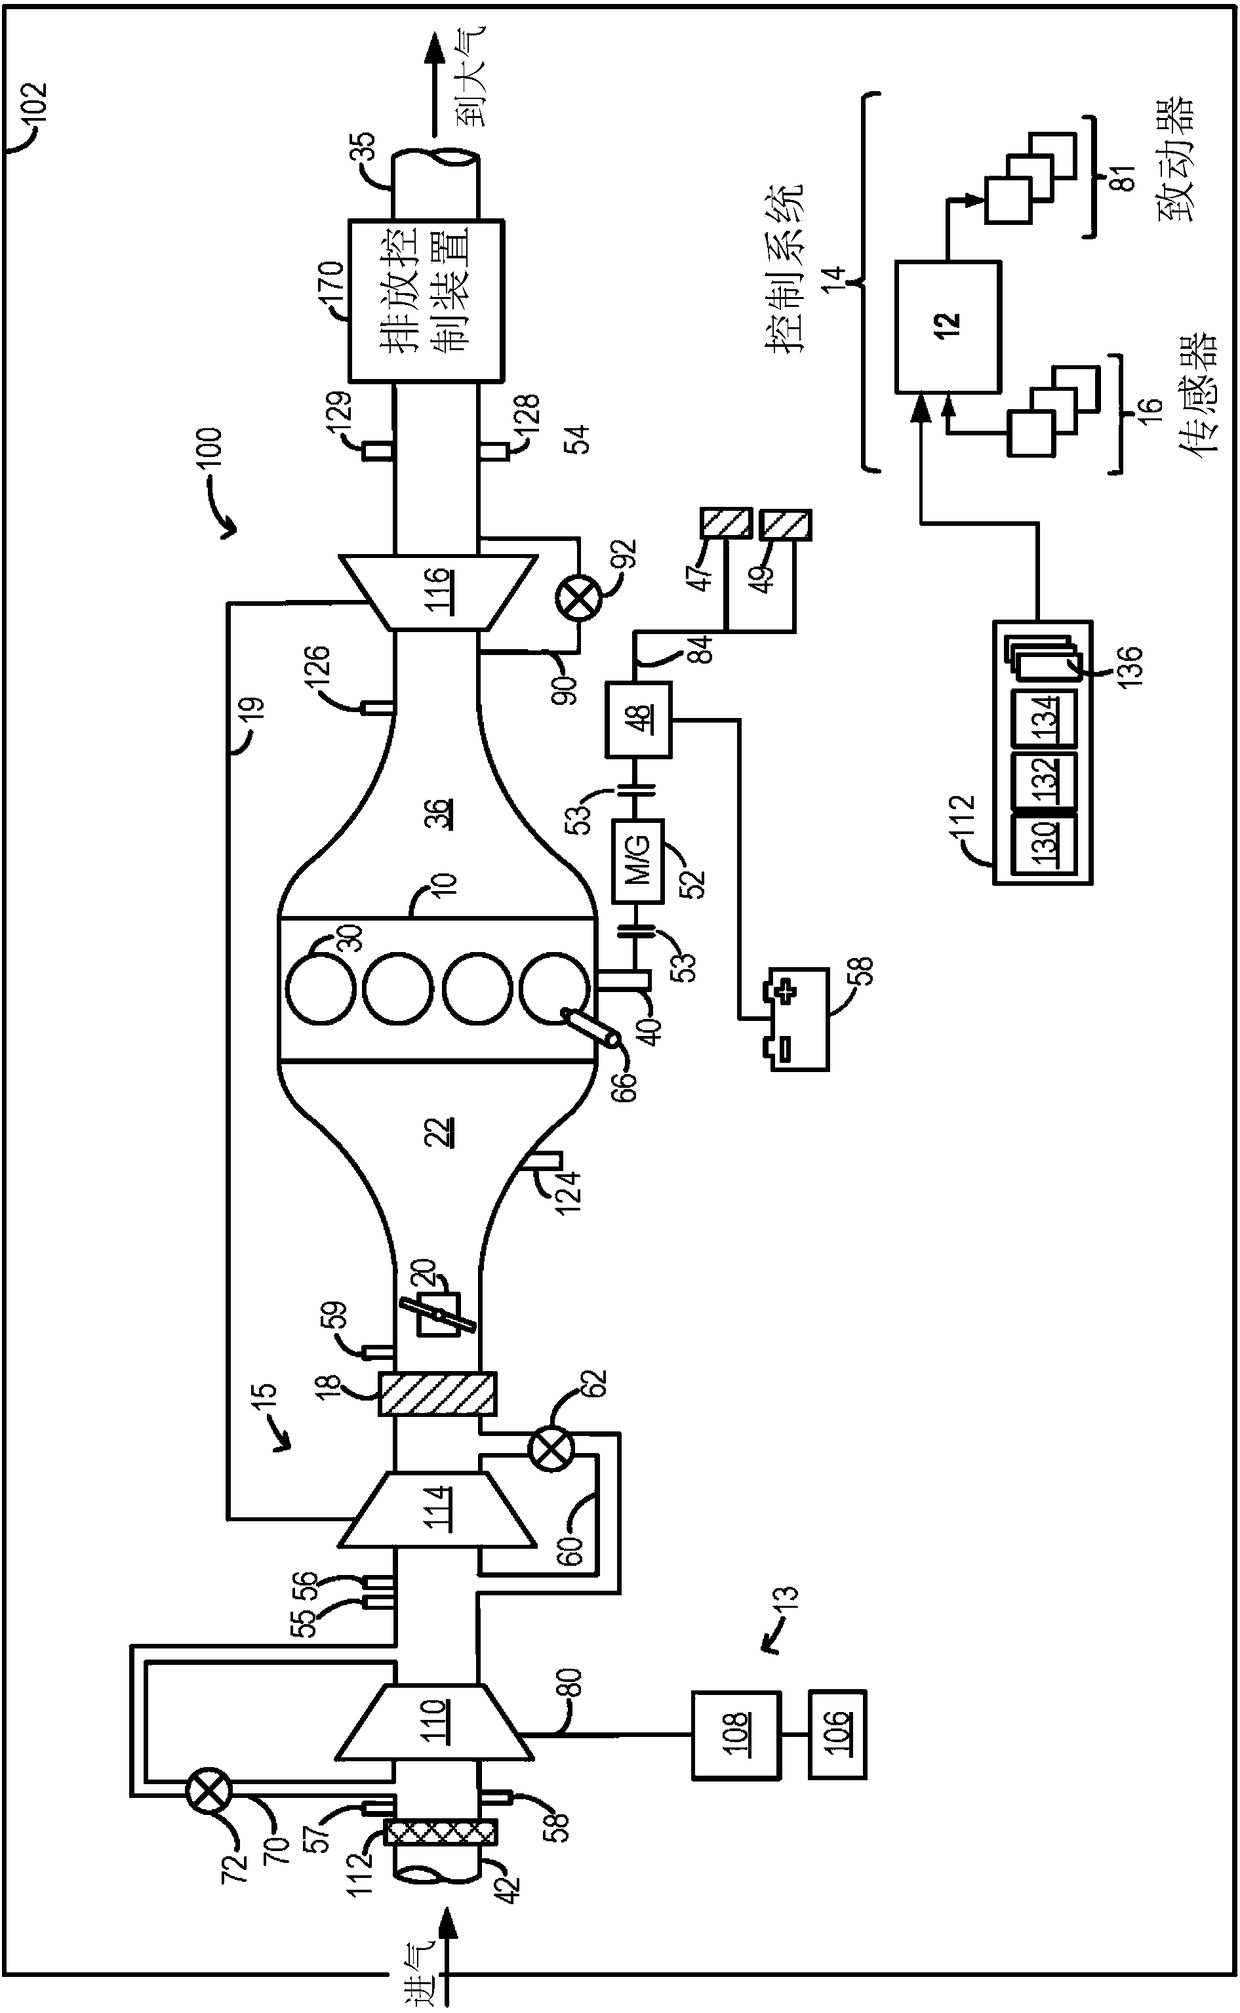 Method and system for boosted engine system